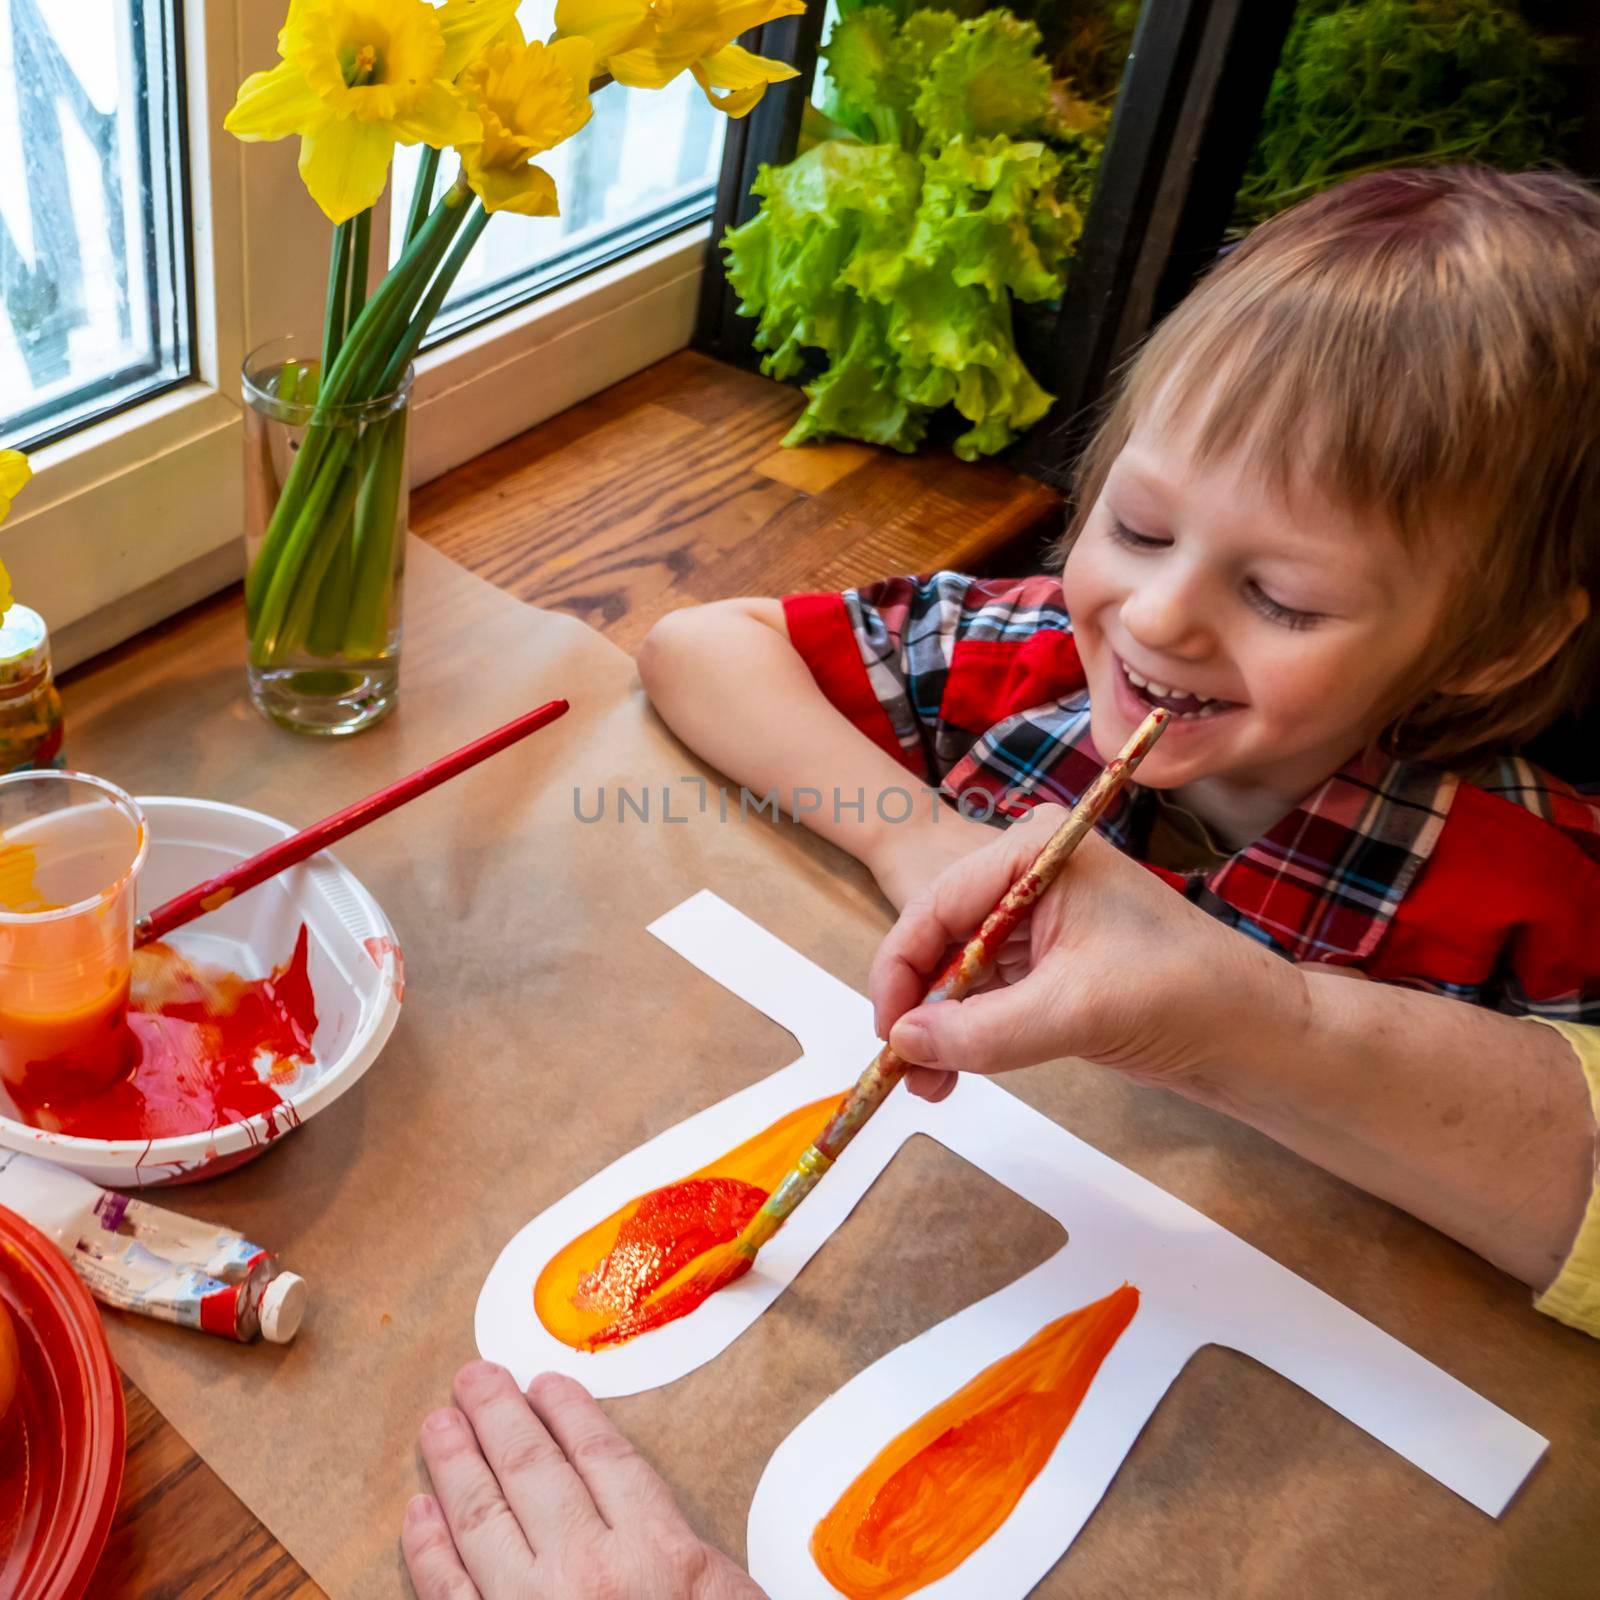 women's speckled hands teach boy draws paper rabbit ears. Preparation for Easter: a child paints paper rabbit ears with paints in the kitchen among fresh greenery, flowers and painted eggs